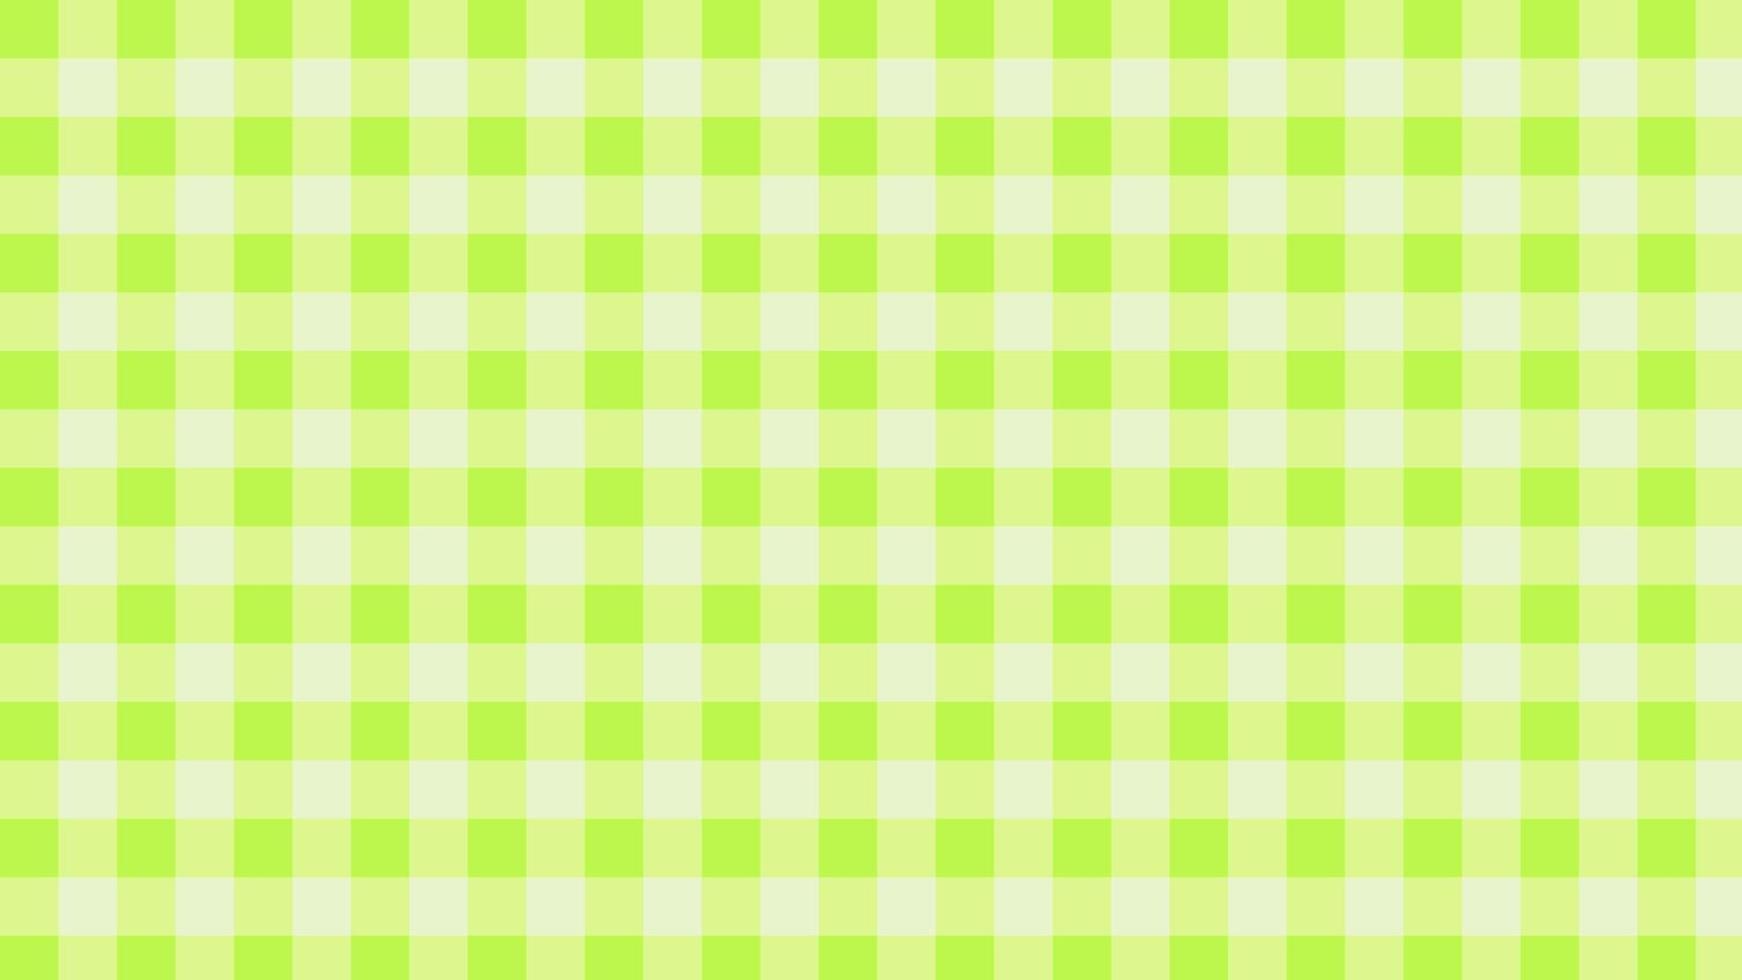 green gingham, checkers, plaid, checkerboard pattern aesthetic wallpaper illustration, perfect for wallpaper, backdrop, postcard, background for your design vector